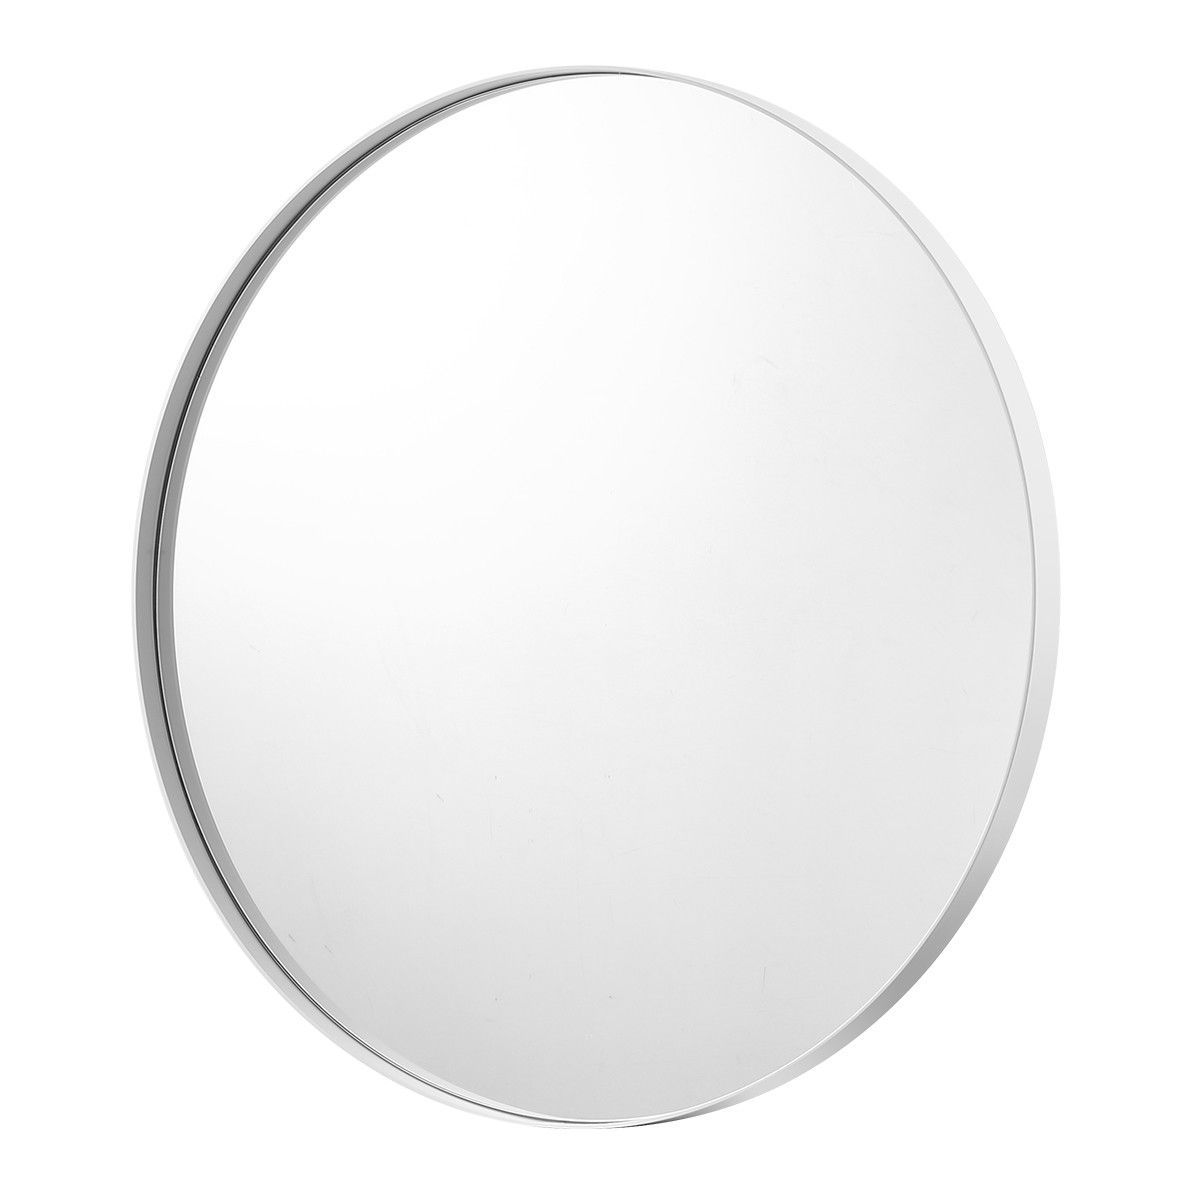 White Large Round Mirror Decorative Wall Mirror 80cm | Crazy Sales Pertaining To Stitch White Round Wall Mirrors (View 14 of 15)